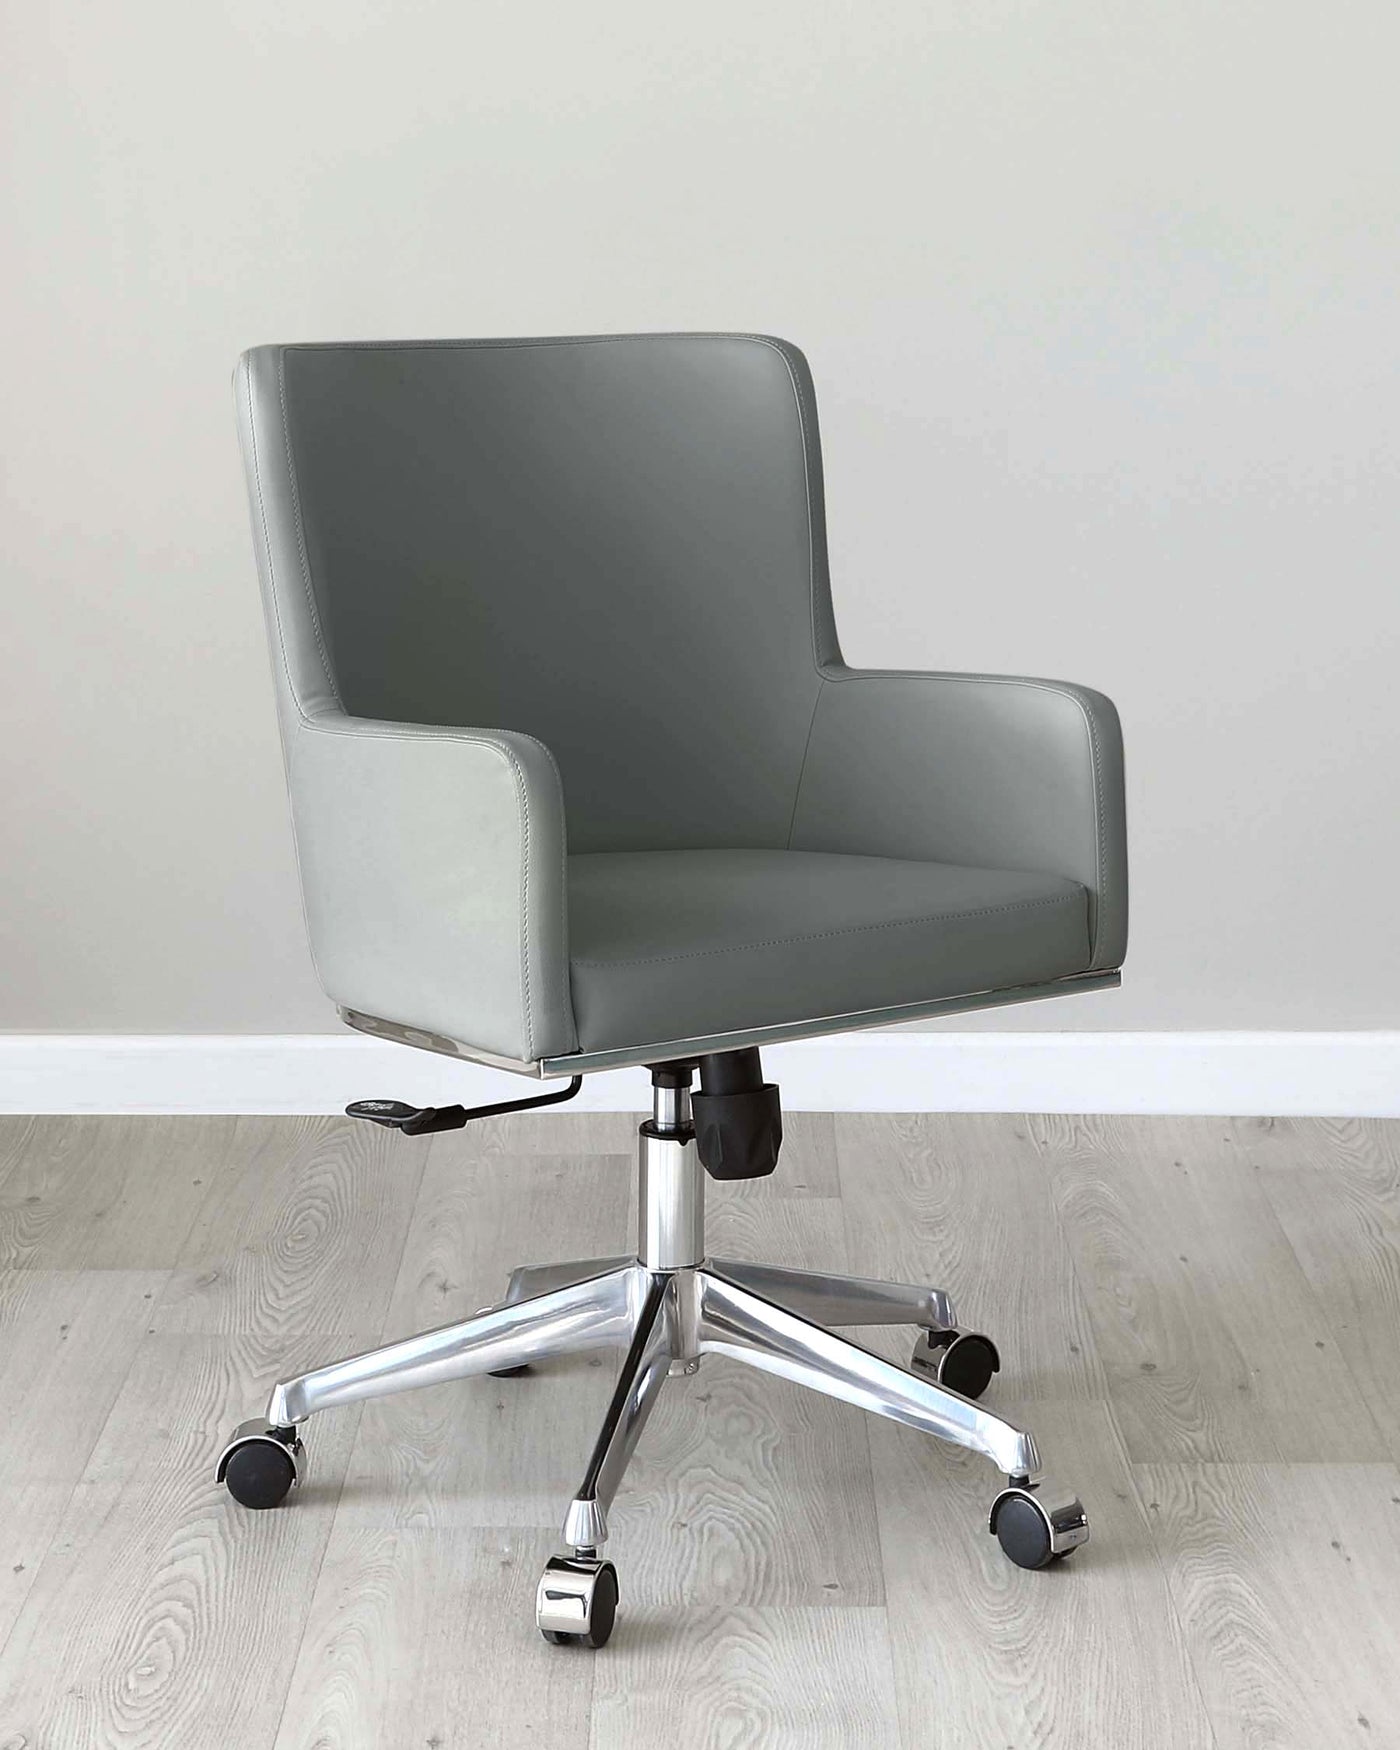 Modern office chair with a sleek grey upholstered seat and backrest, featuring a wide seat, gently curved armrests, and white stitching detail. Chair stands on a five-point chrome base equipped with caster wheels for ease of mobility, and includes a gas lift mechanism for height adjustment.